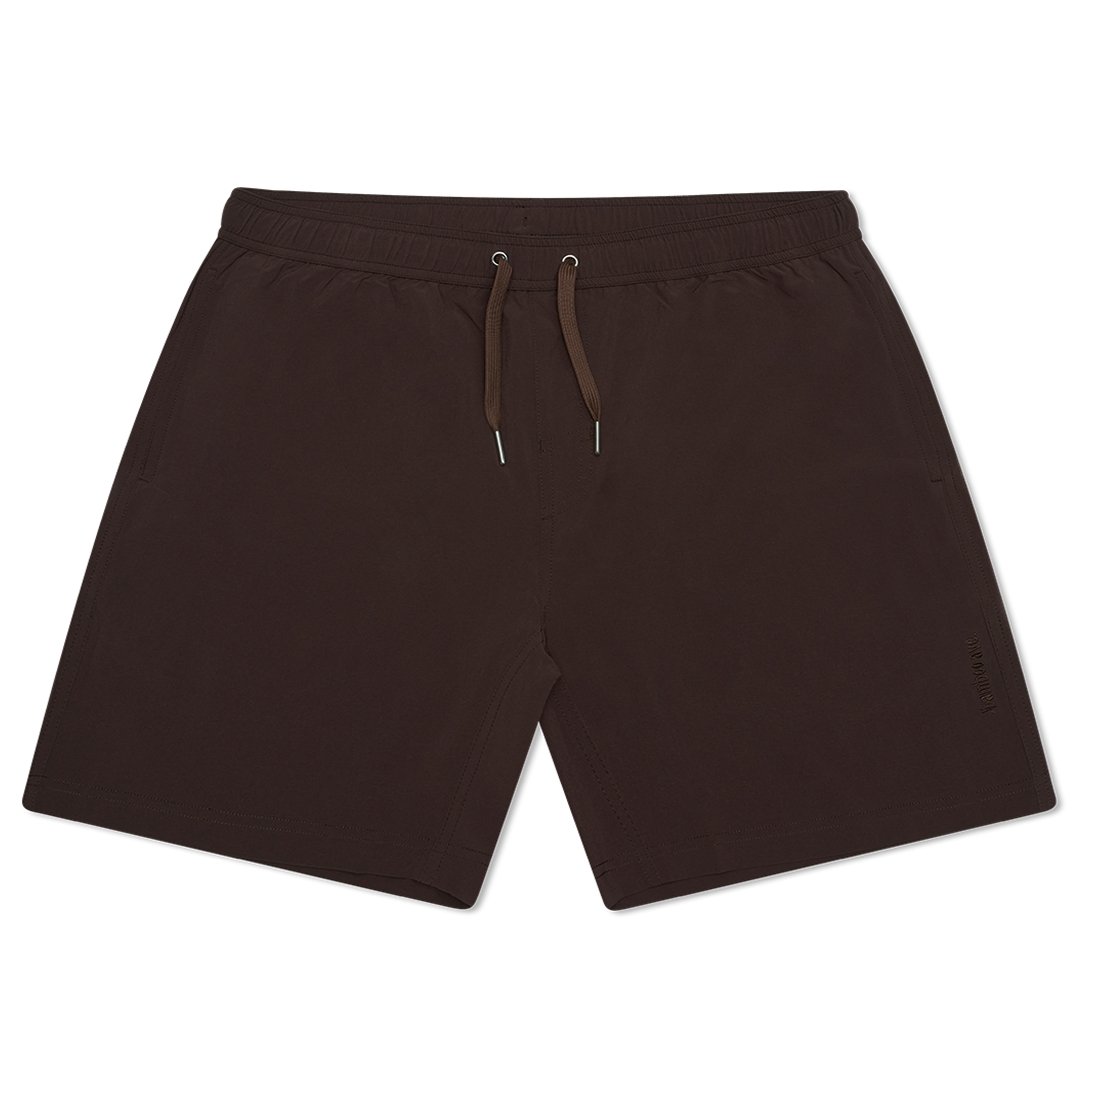 Tunnel Vision 5” - Brown Shorts - Bamboo Ave